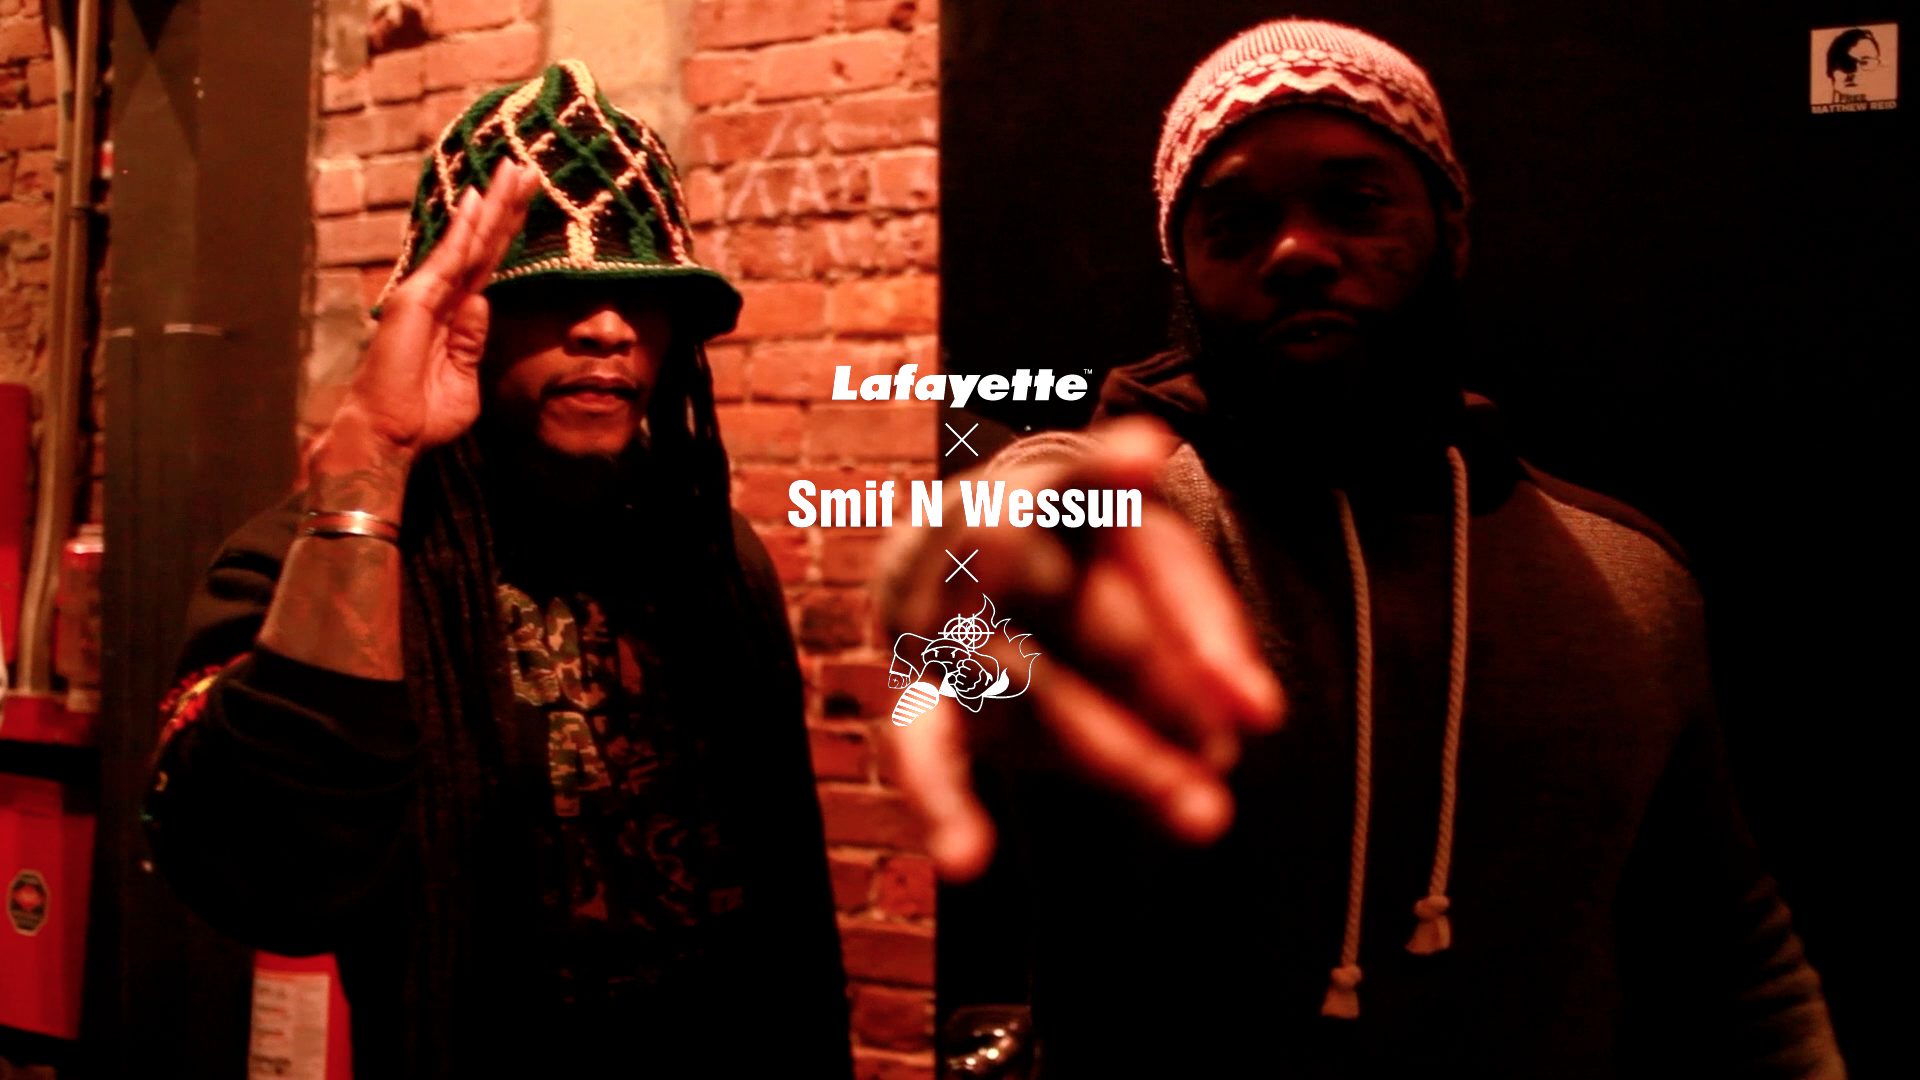 Smif N Wessun shout out to Lafayette “Born and Raised Pull Over Sweatshirt” Delivery!!!